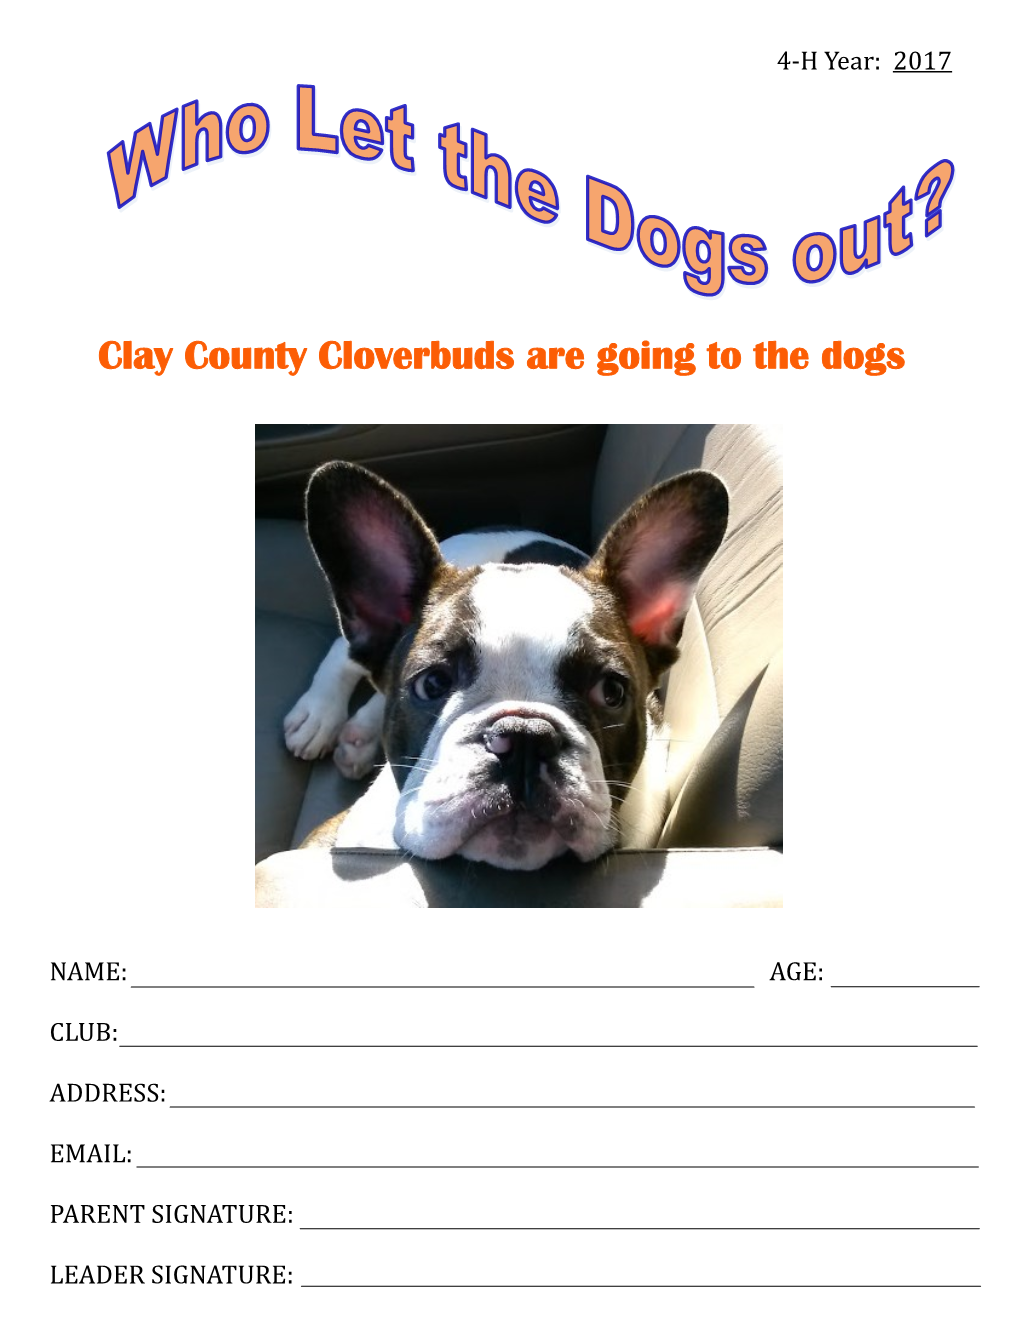 Clay County Cloverbuds Are Going to the Dogs